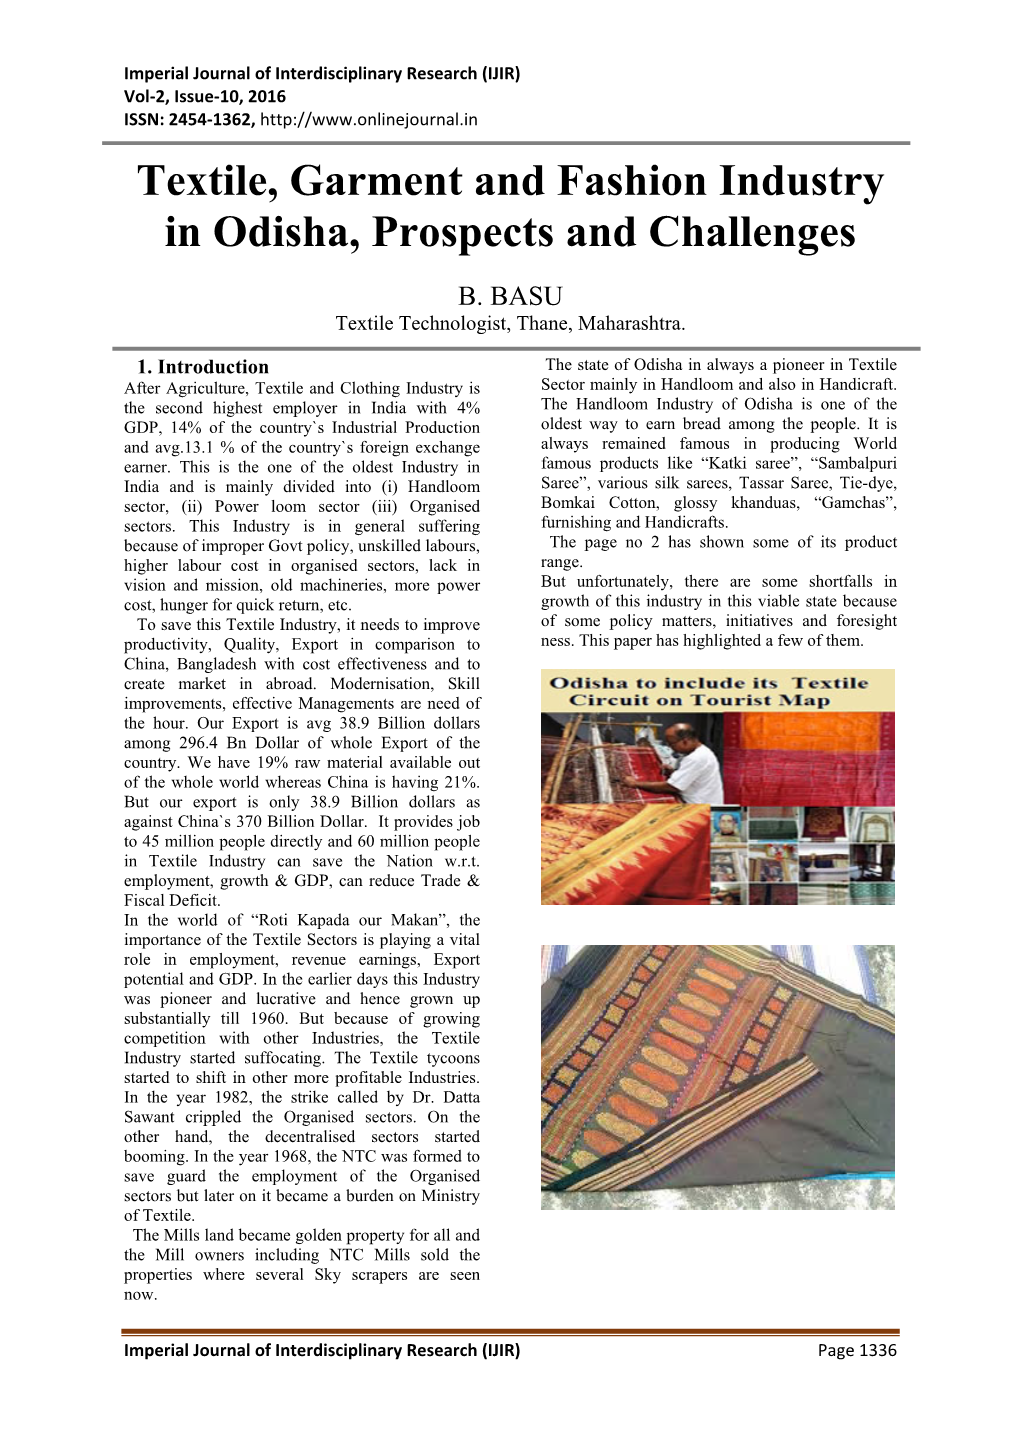 Textile, Garment and Fashion Industry in Odisha, Prospects and Challenges